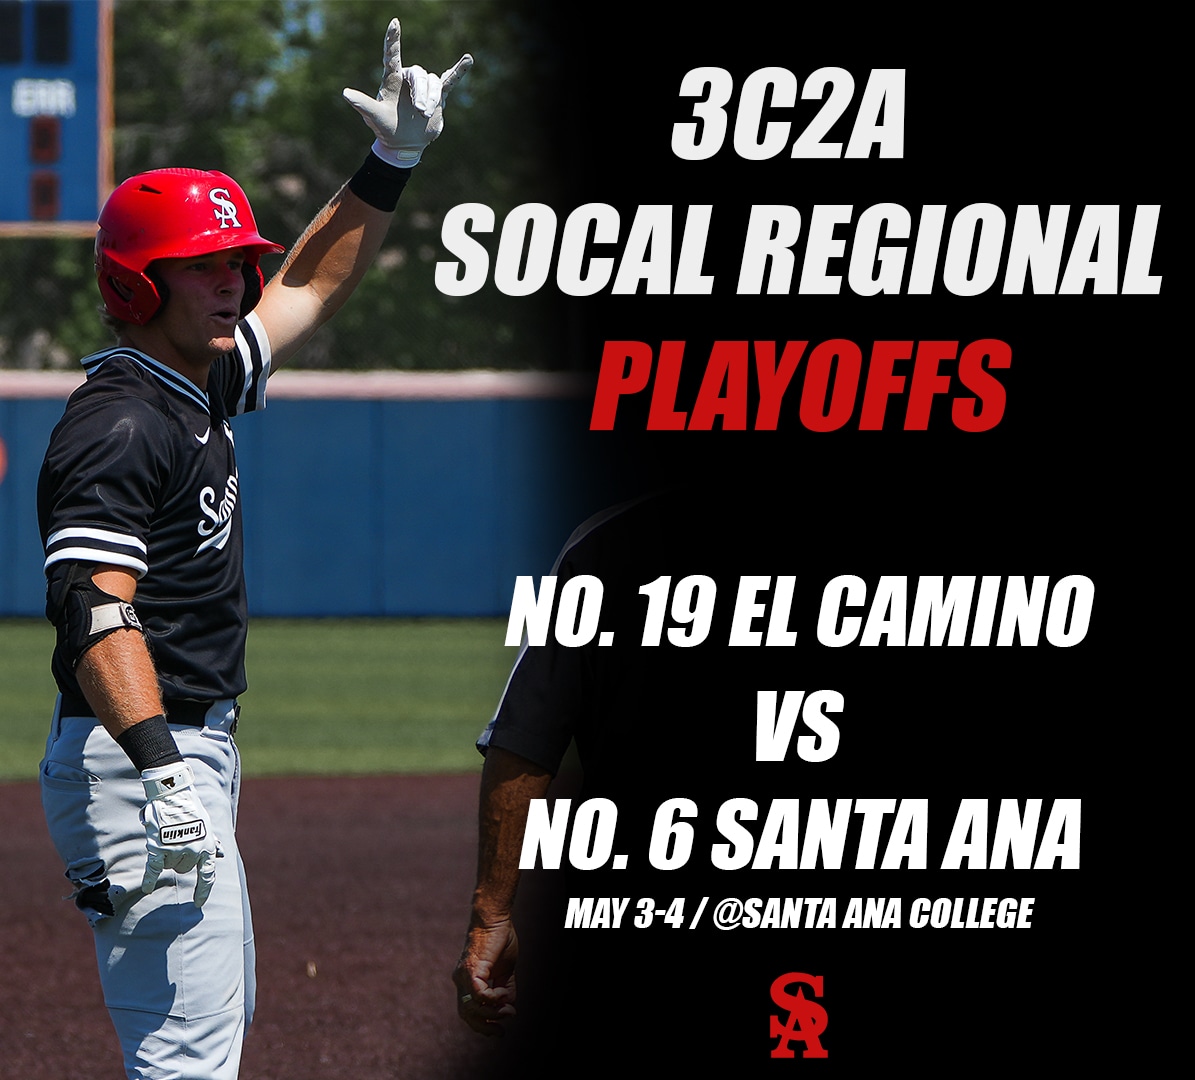 The Santa Ana College Baseball team has earned the No 6️⃣ seed and will host No. 1️⃣9️⃣ El Camino College in the 3C2A SoCal Regional Playoffs! Game 1 will be on Friday, May 3rd at 2PM. Tickets: $12 - GA $8 - Seniors 60+, Students, Children 6-12. #DonsRoll #3C2A #Playoffs